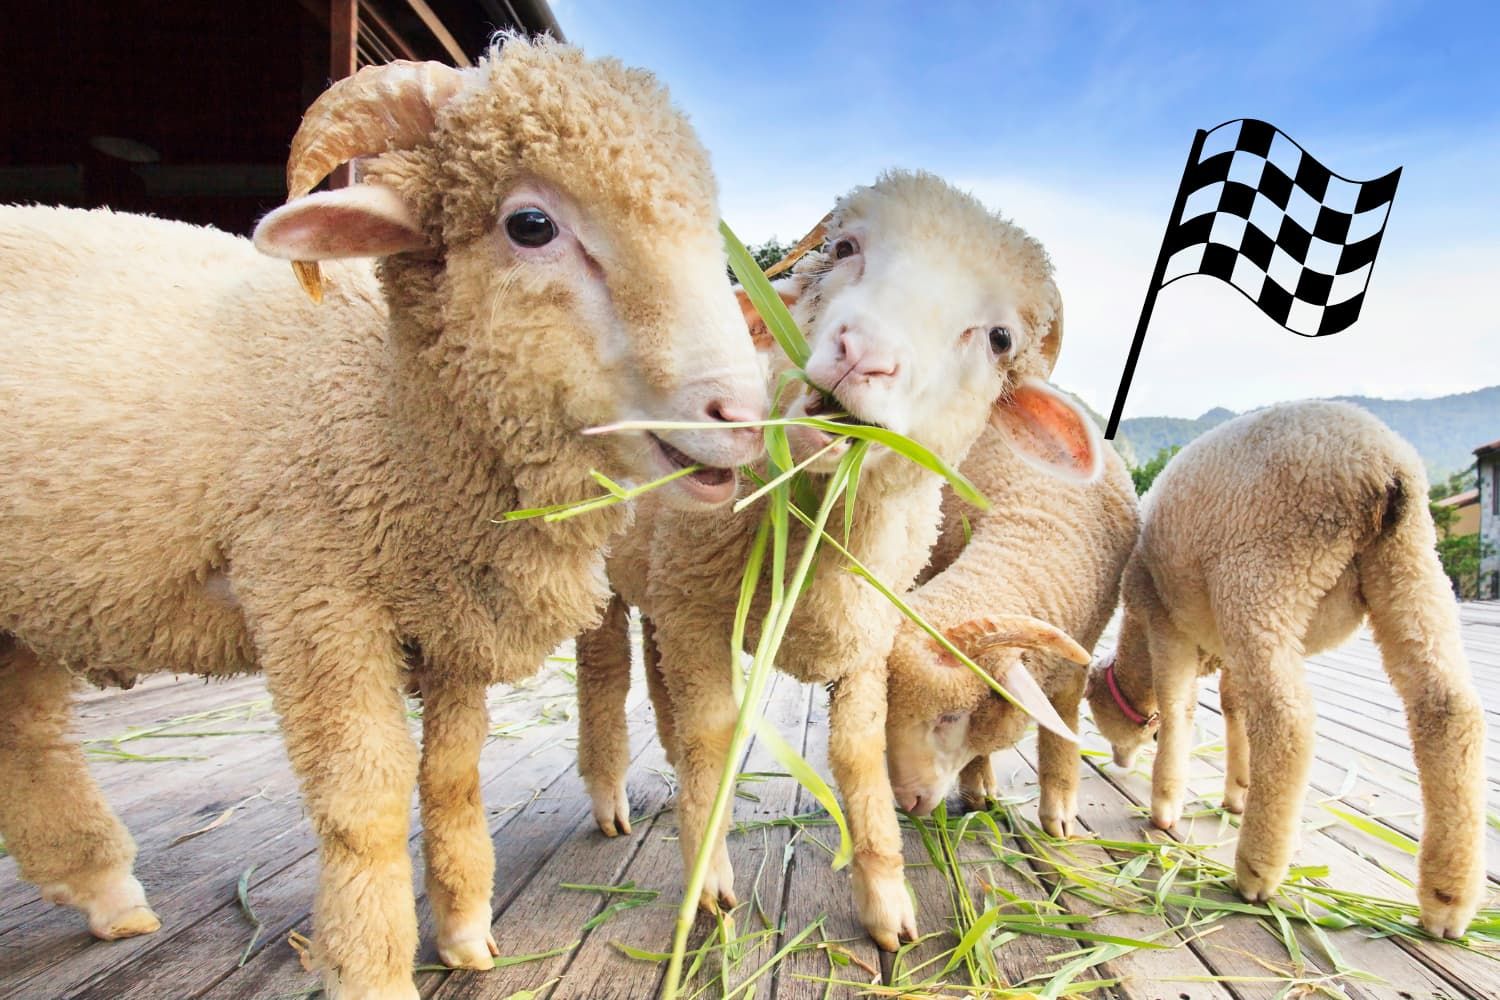 Game%20-%20OT%20Psalm%2023%20-%20The%20feed%20the%20sheep%20relay%20race-6bb58723 Promises